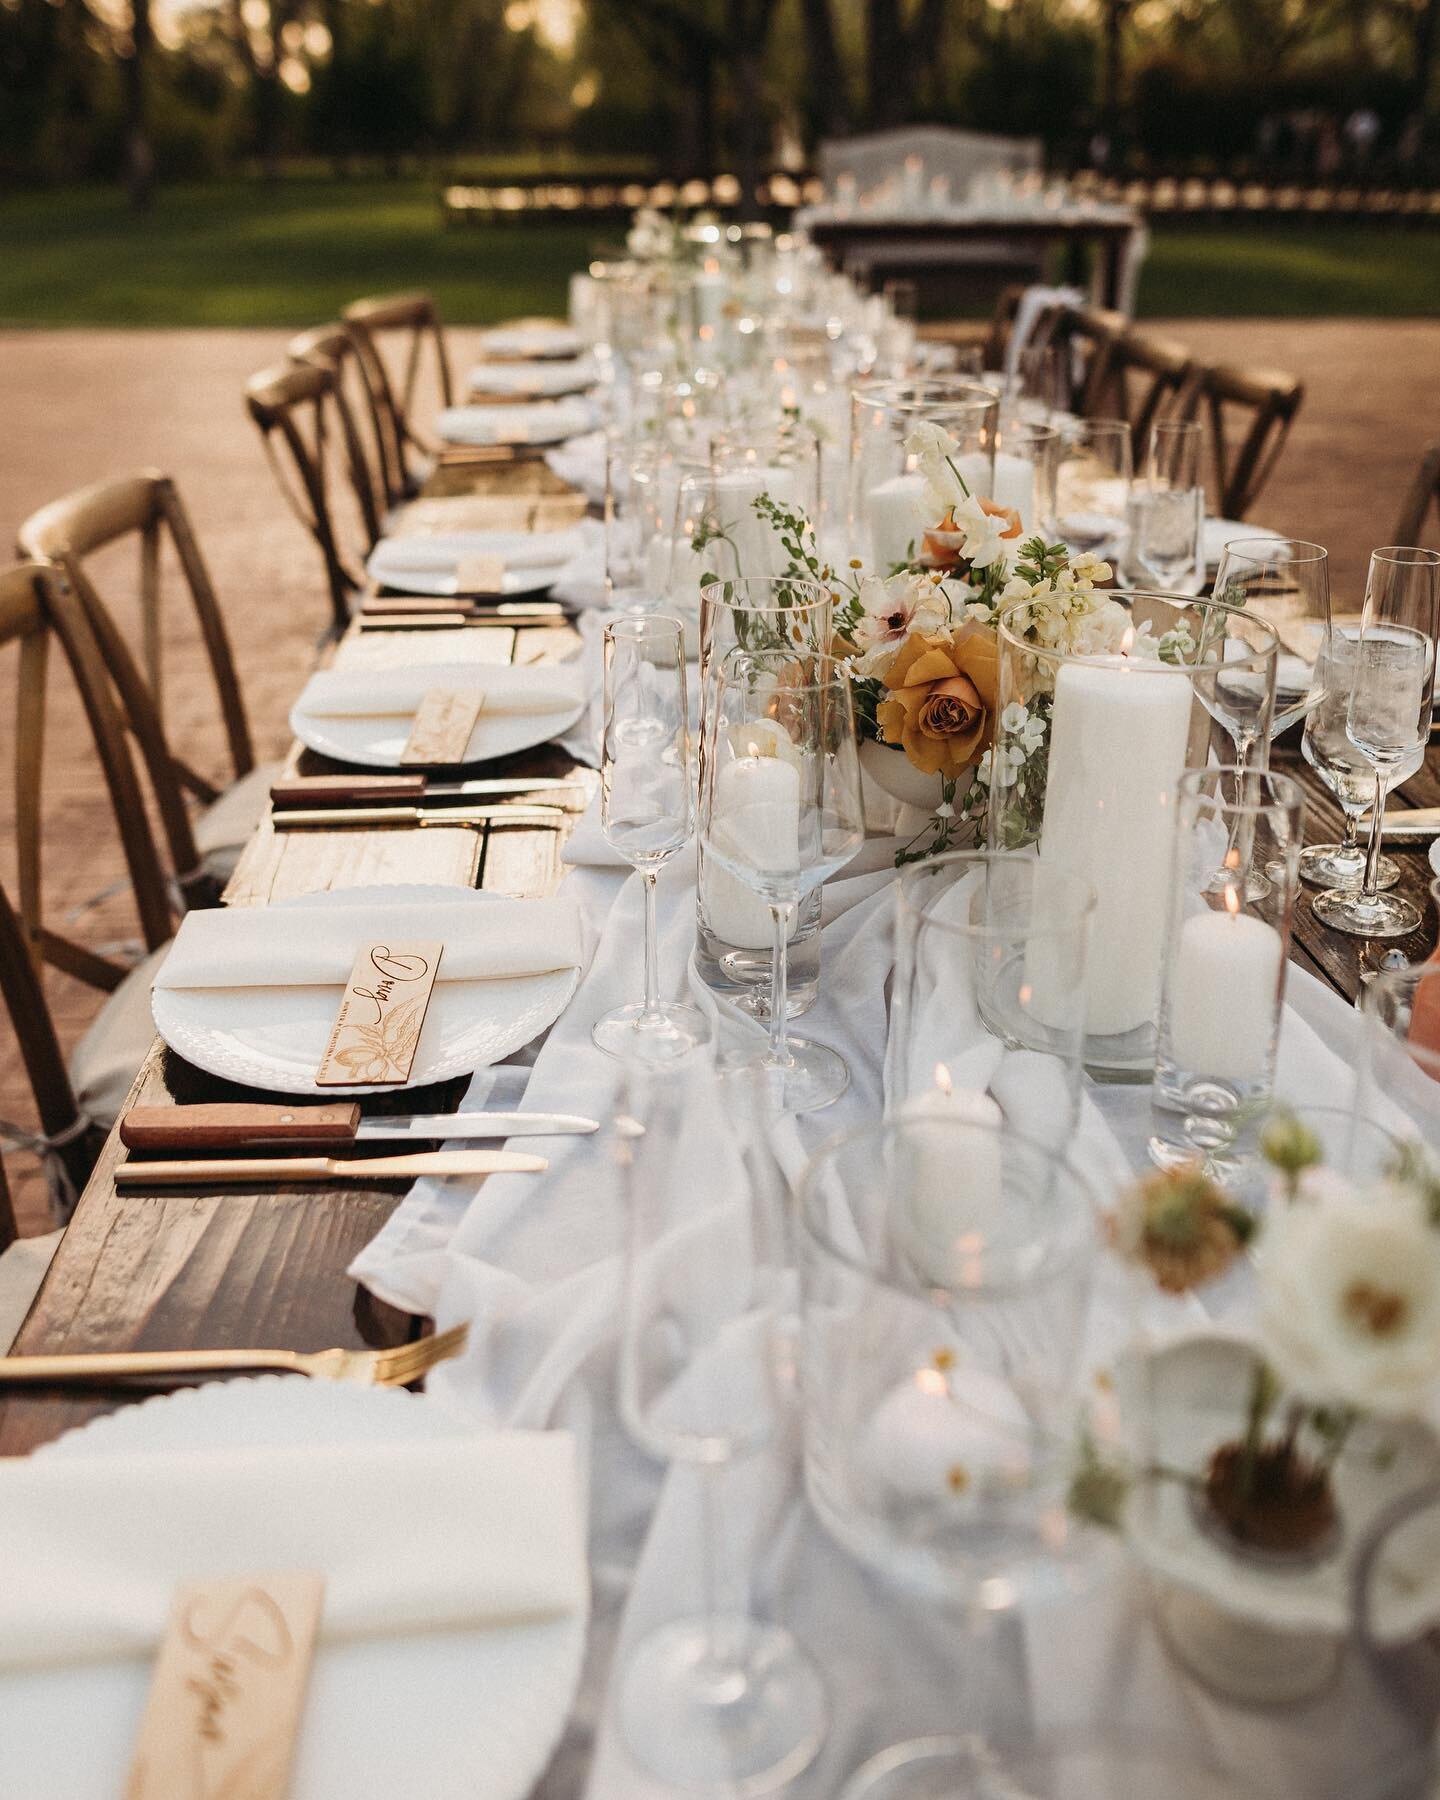 Flowers 🤝 candles

The secret to creating dreamy tablescapes and wowing your guests is all about the ambiance we create. 

Let&rsquo;s chat more! 

Click the link in our bio to check out pricing and availability✨

Vendor team:
Venue: @venueatthegrov